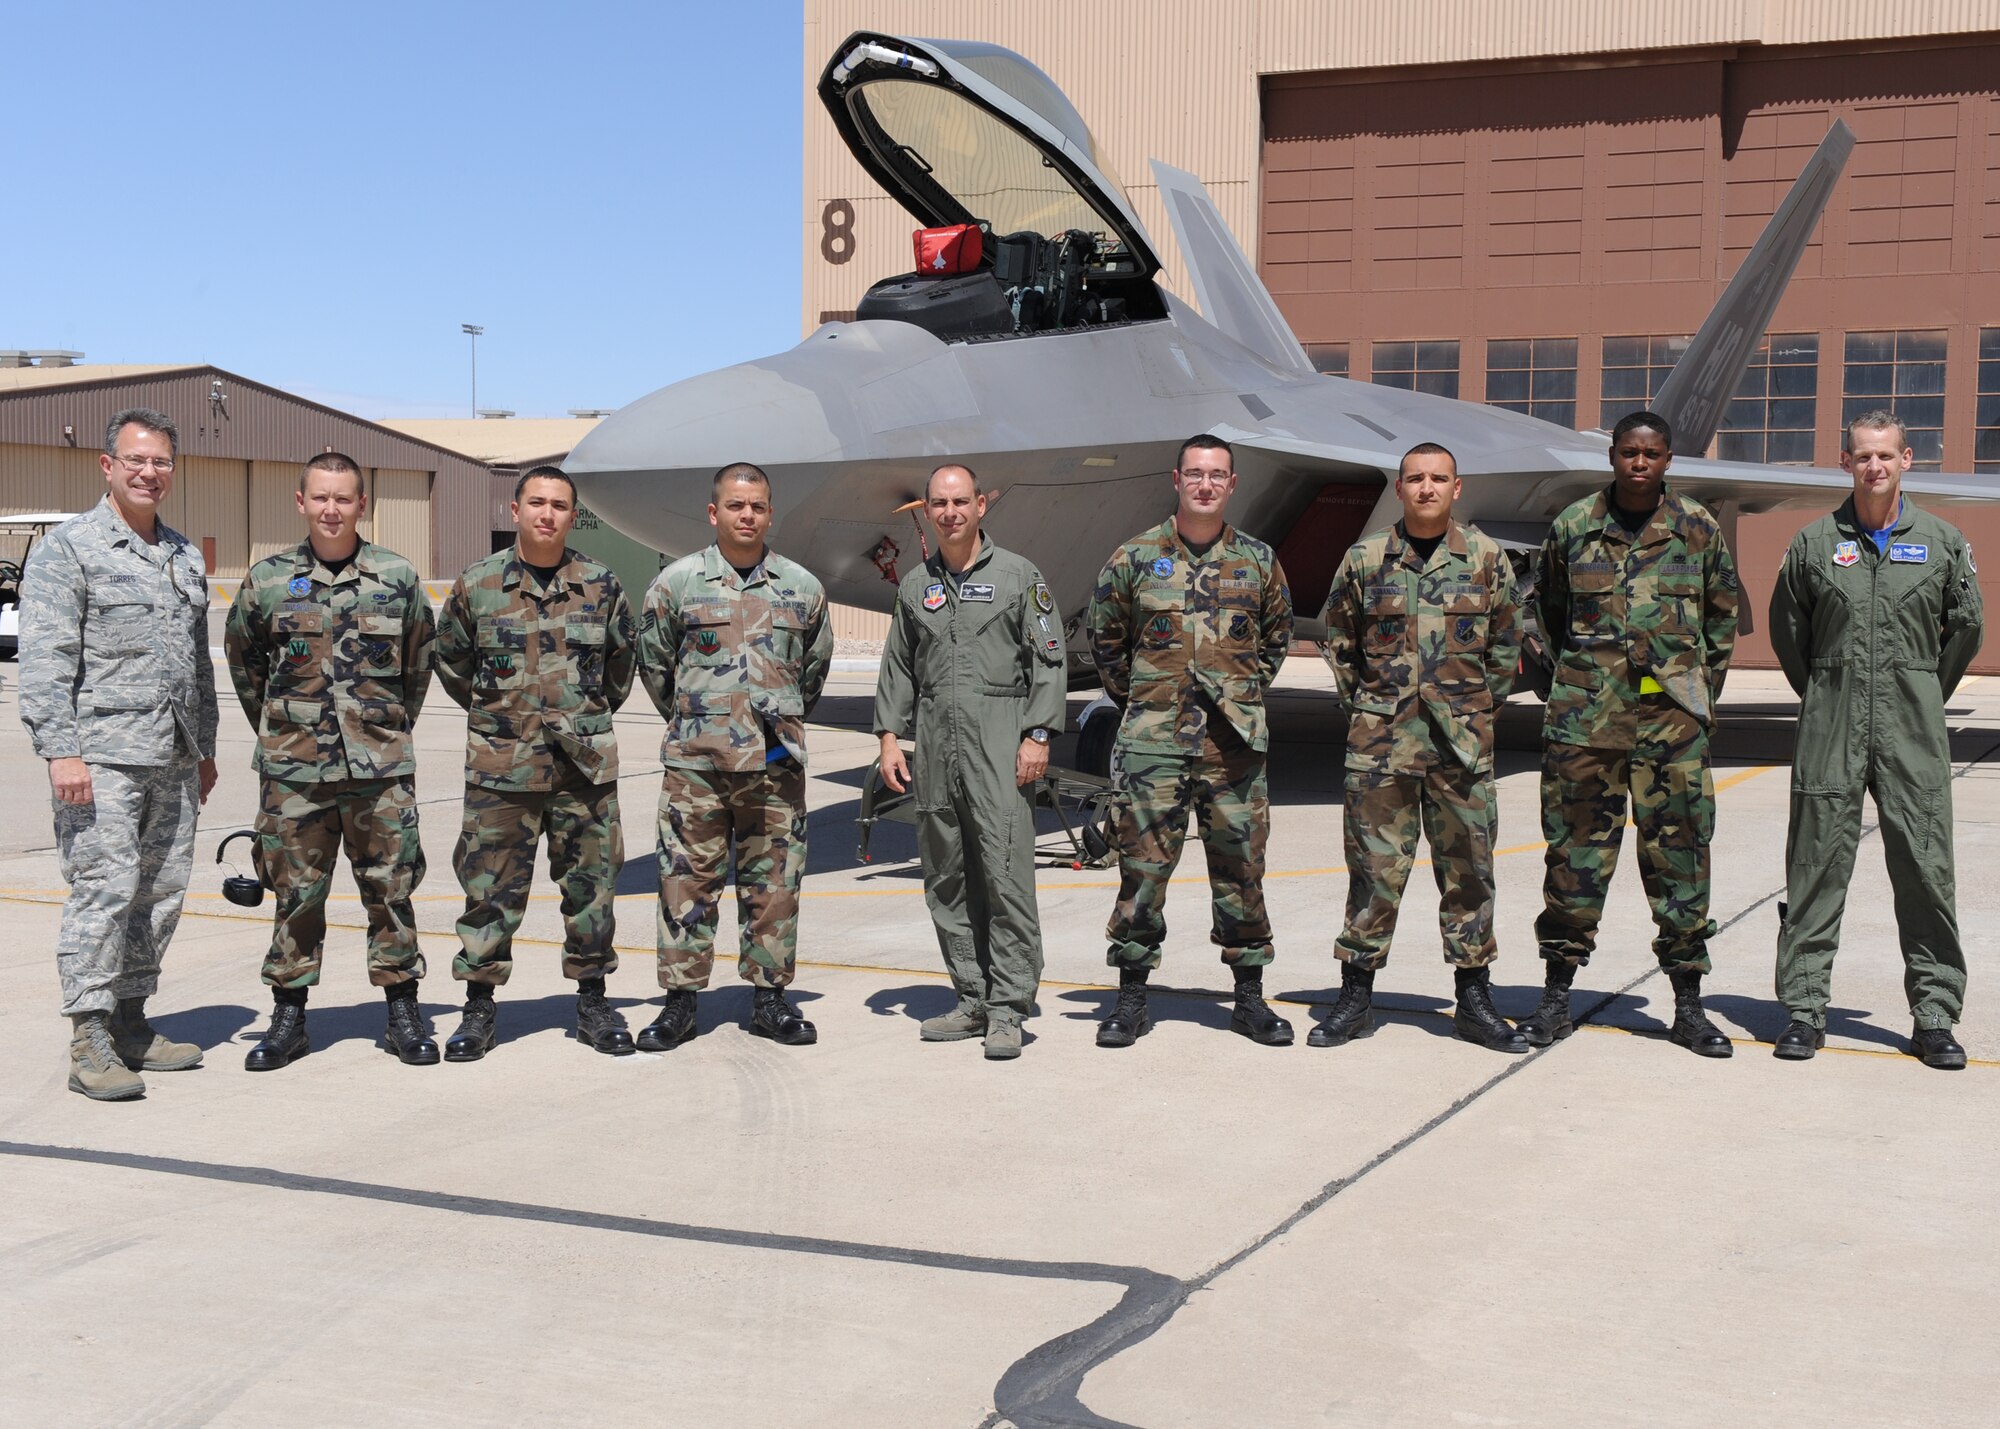 The teams that compete in the 49th Maintenance Group Quarterly Load Crew competition pose for a photo with members of the 49th Fighter Wing leadership, April 10, at Holloman Air Force Base, N.M.  (U.S. Air Force photo/Senior Airman Michael Means)